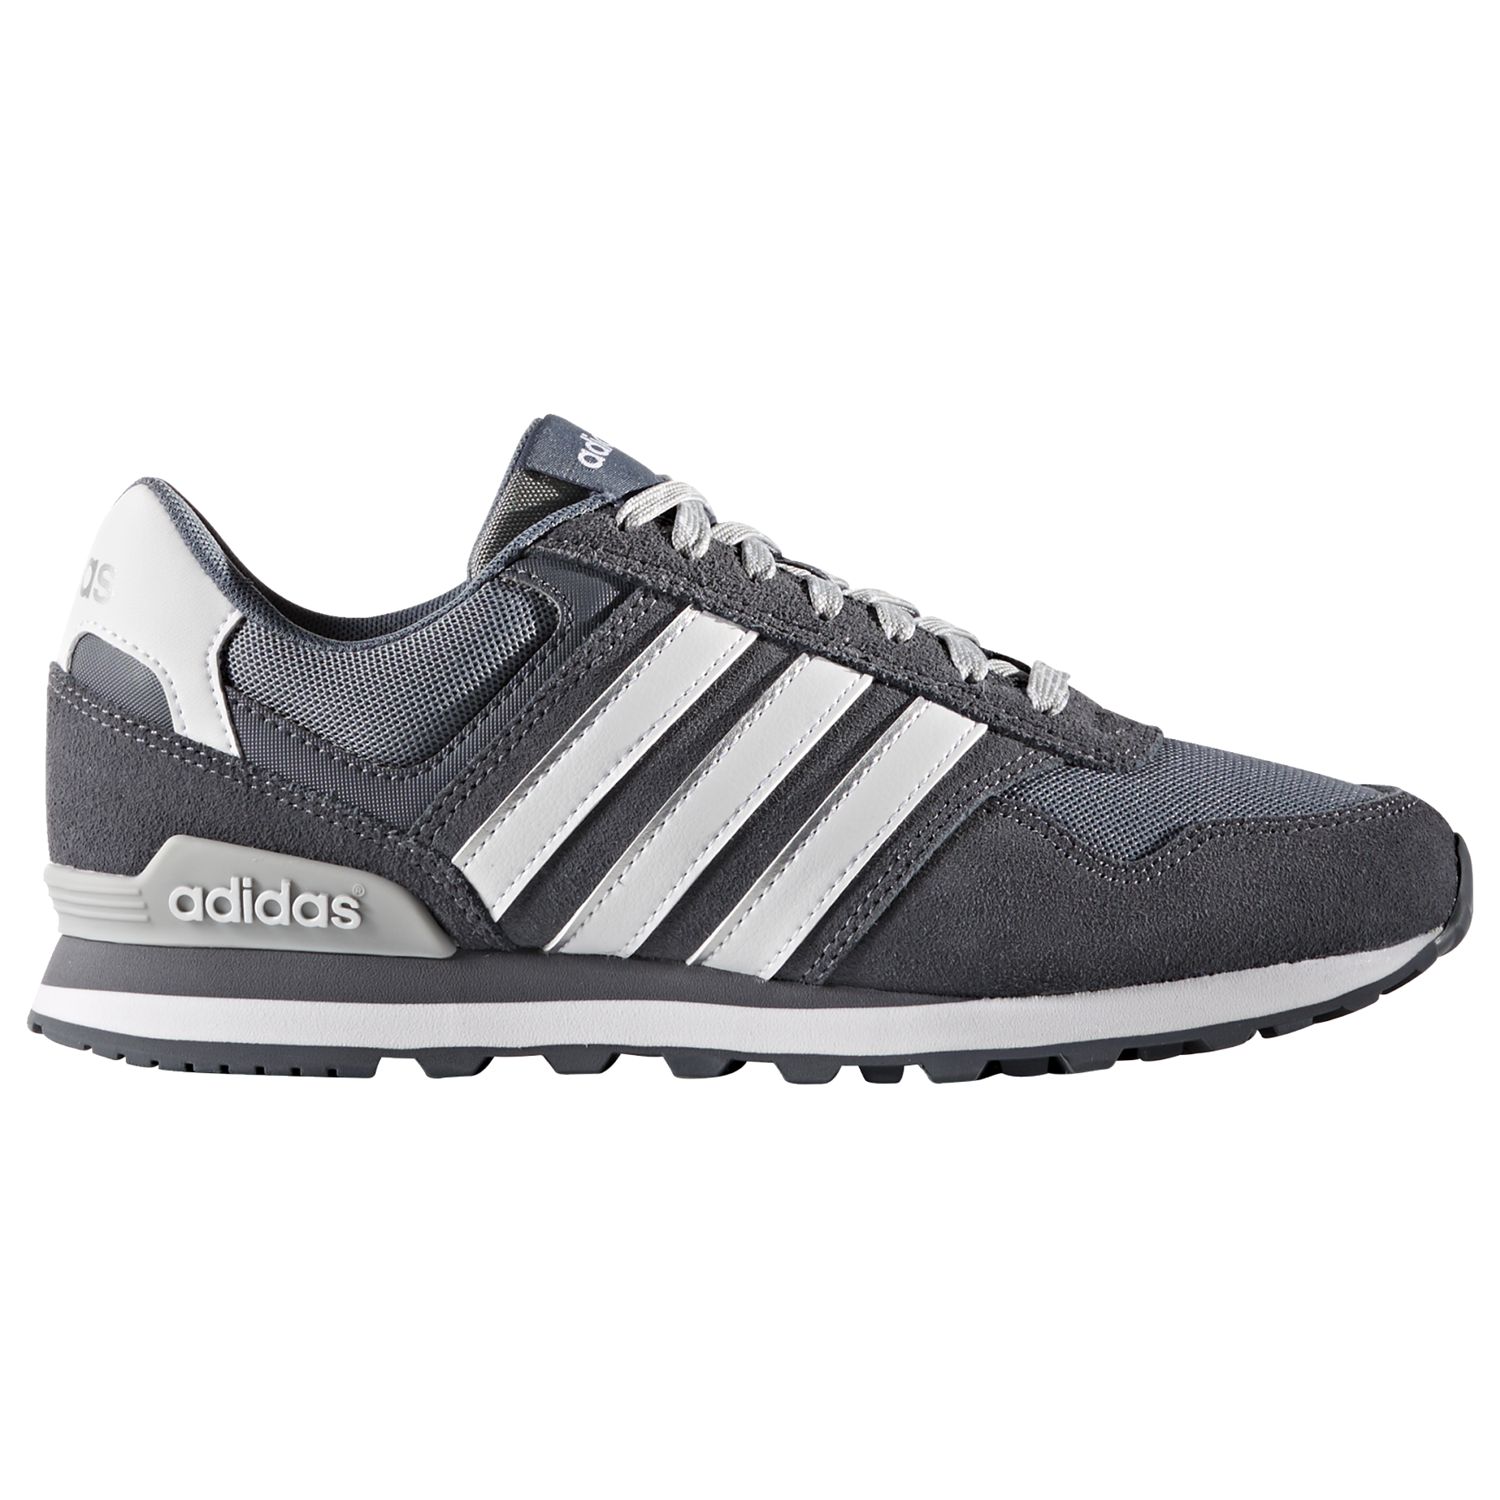 adidas 10k casual shoes